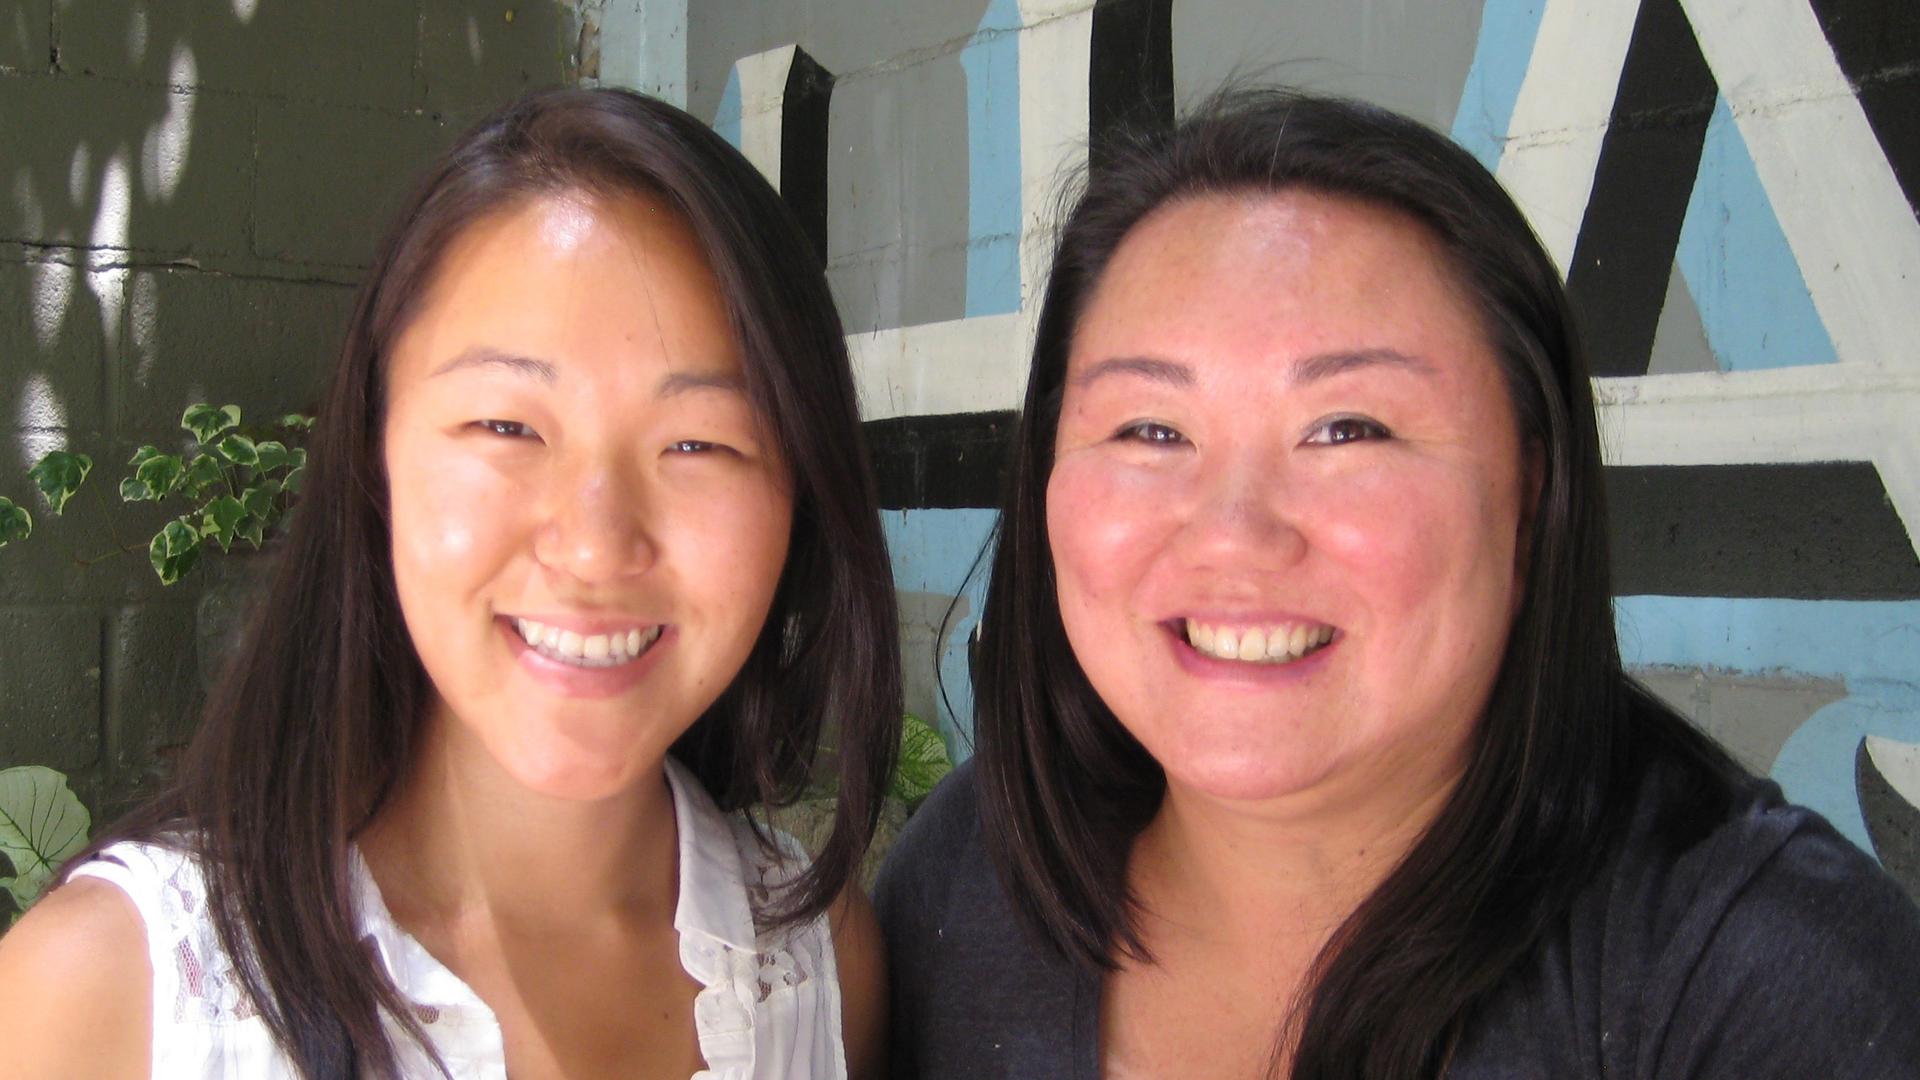 Kaomi Goetz, 44, (r) with distant relative, Alice Thompson, 28. They're both Korean-American adoptees who found a shared genetic connection on a DNA database, after they had met by chance at a gathering for adoptees in Brooklyn, New York. Kaomi is still t